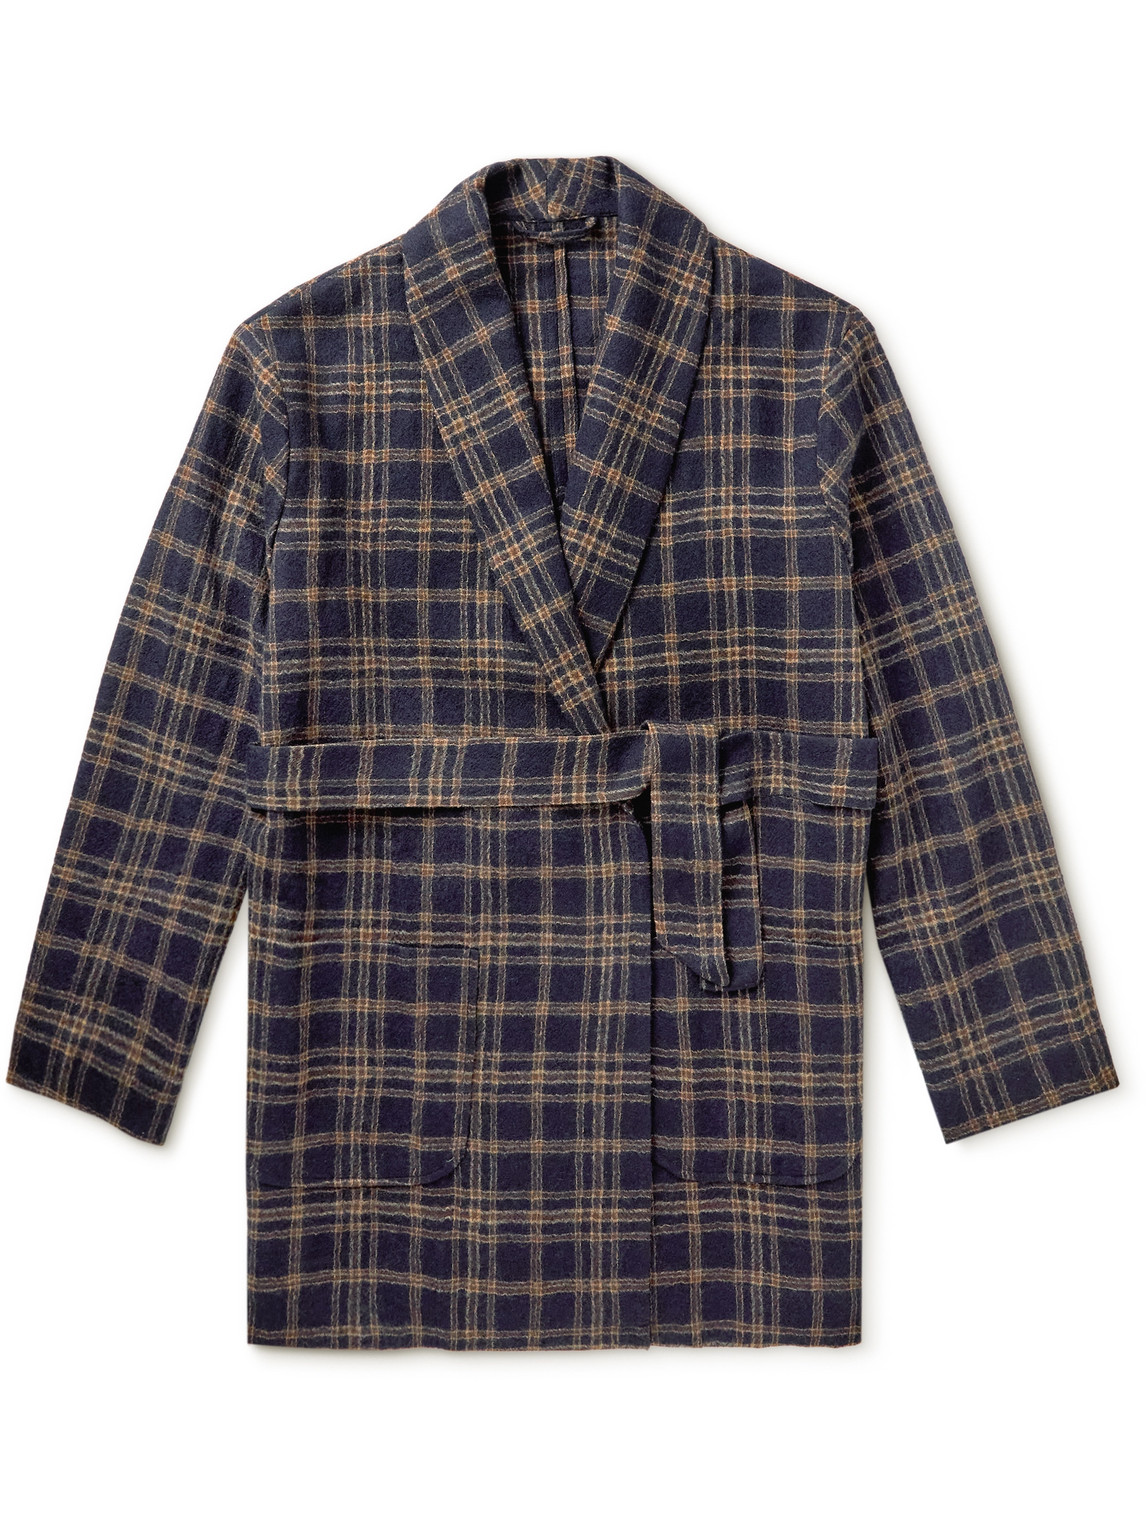 DE BONNE FACTURE BELTED CHECKED WOOL JACKET